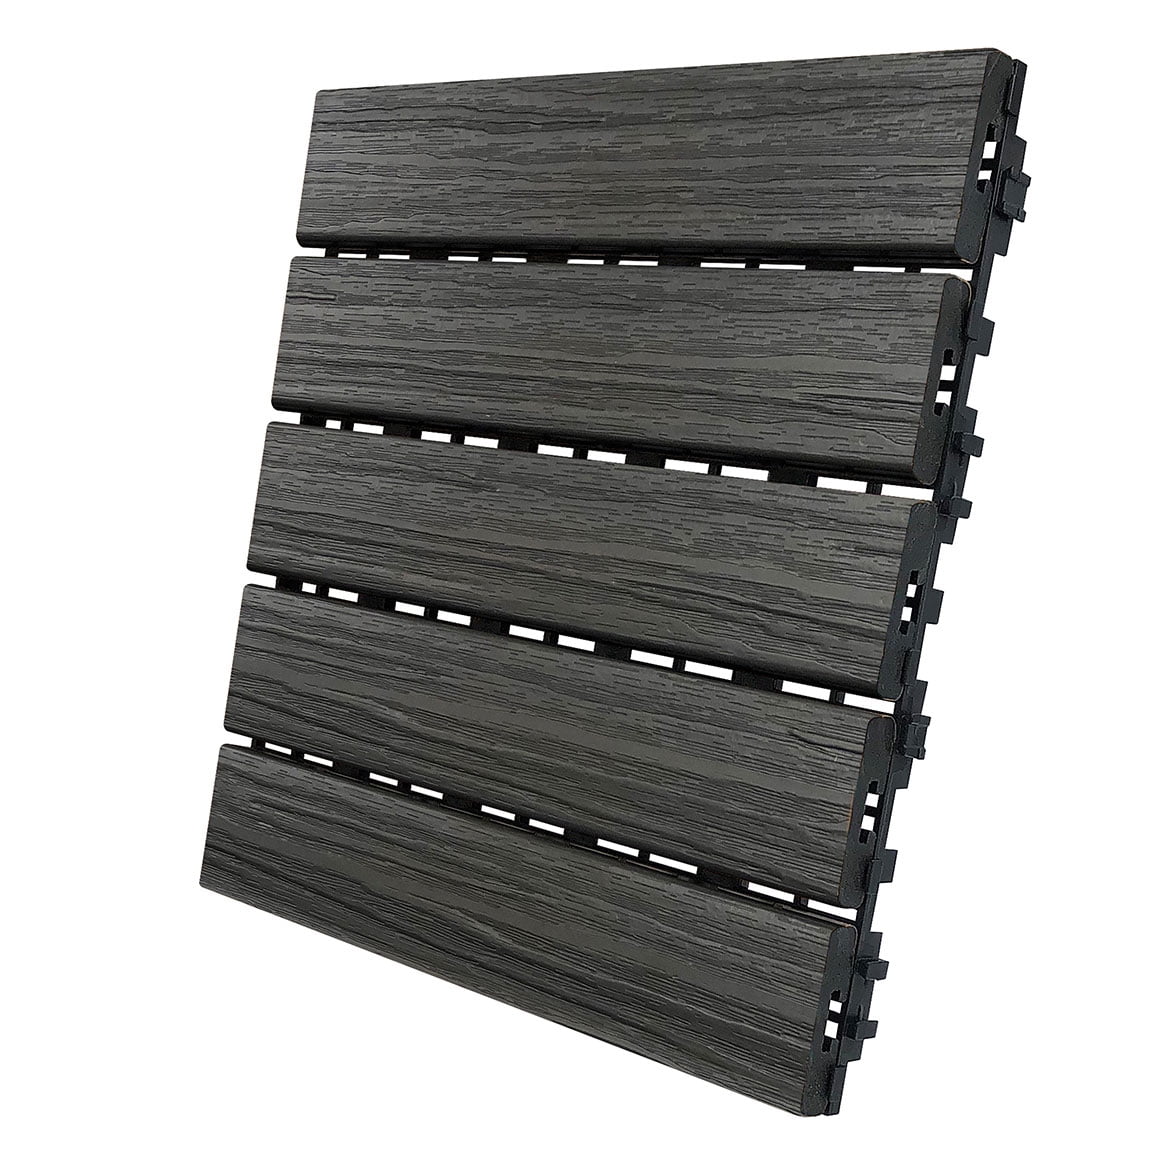 5011910 6 Sq. Ft. 12 X 12 In. Driftwood Composite Balcony & Deck Tiles - Pack Of 6